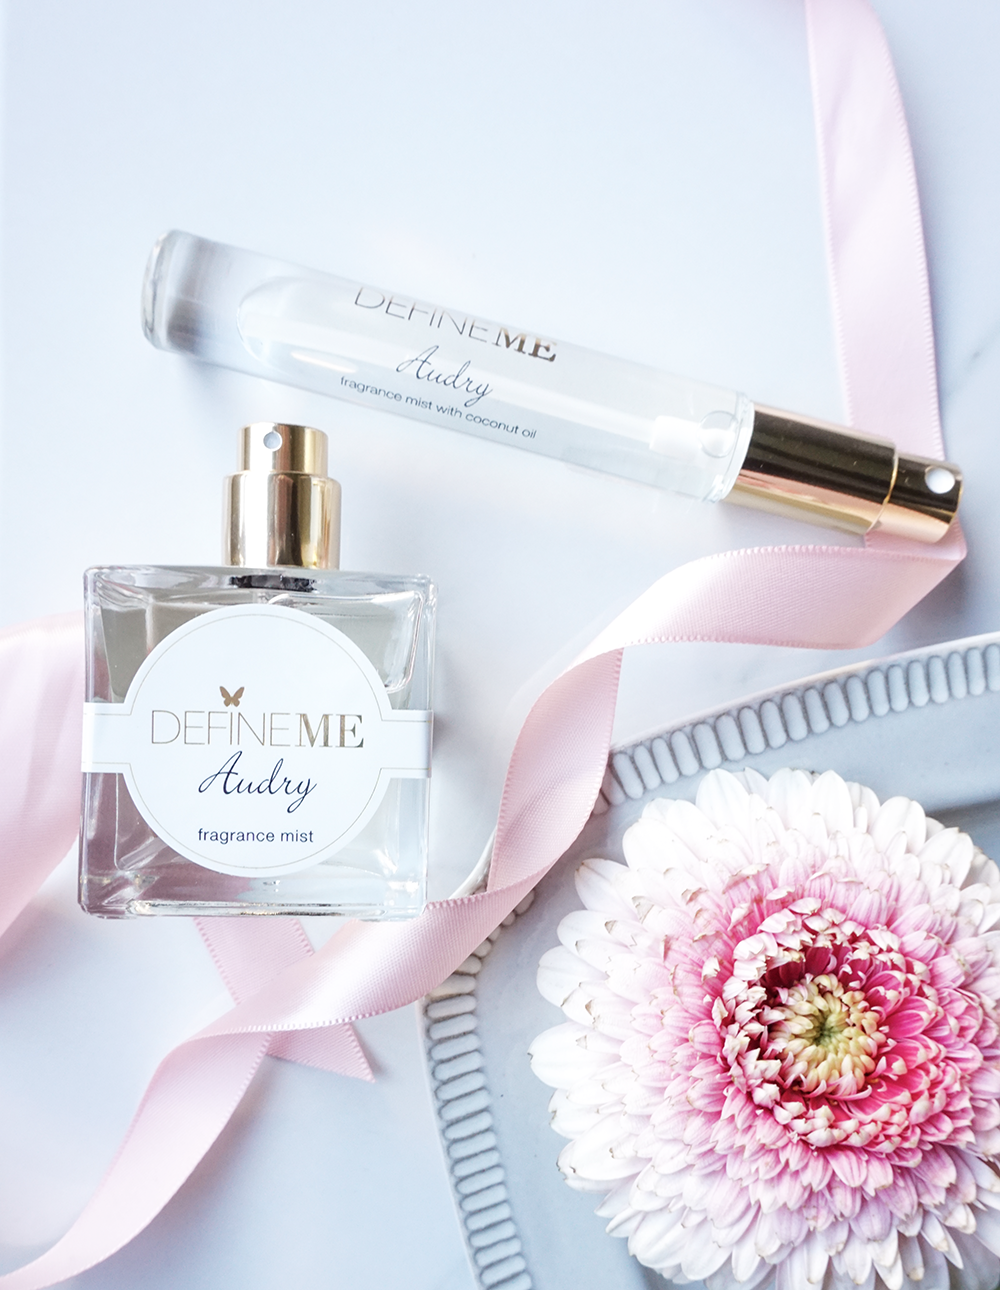 DefineMe Fragrance Audry Mist and purse spray lying on white background with pink ribbon and soft pink flower.